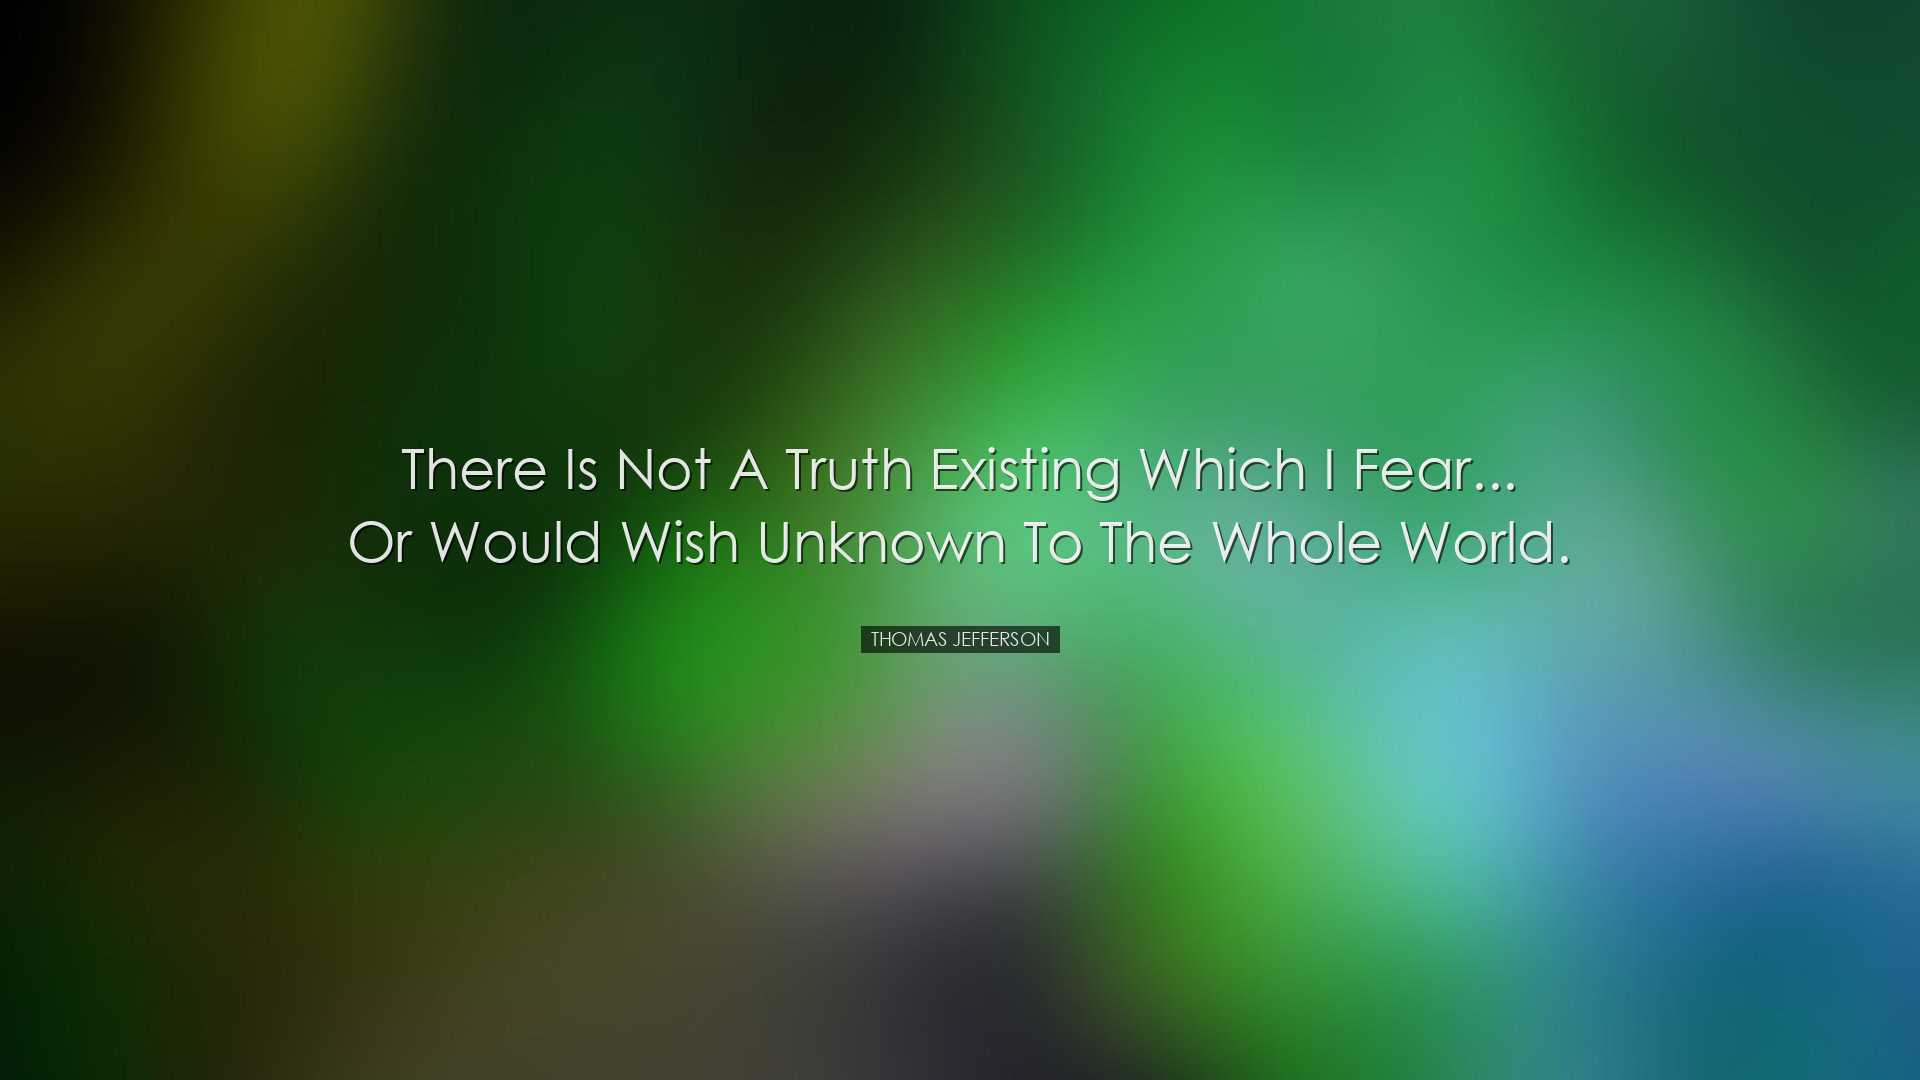 There is not a truth existing which I fear... or would wish unknow